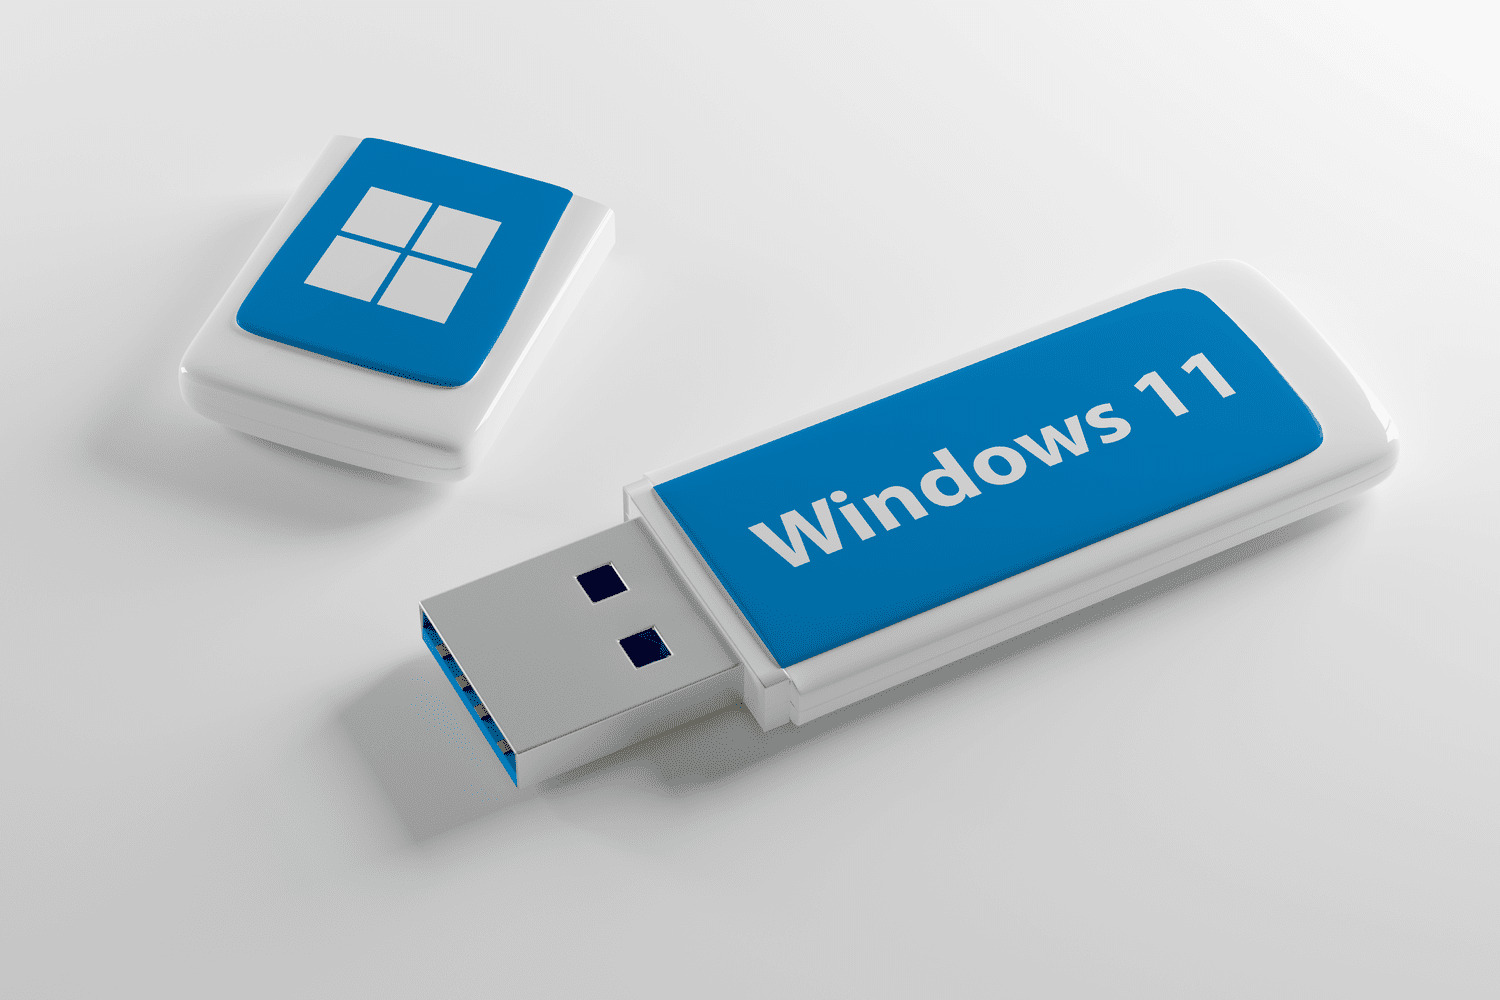 How To Download Windows 11 Onto A USB